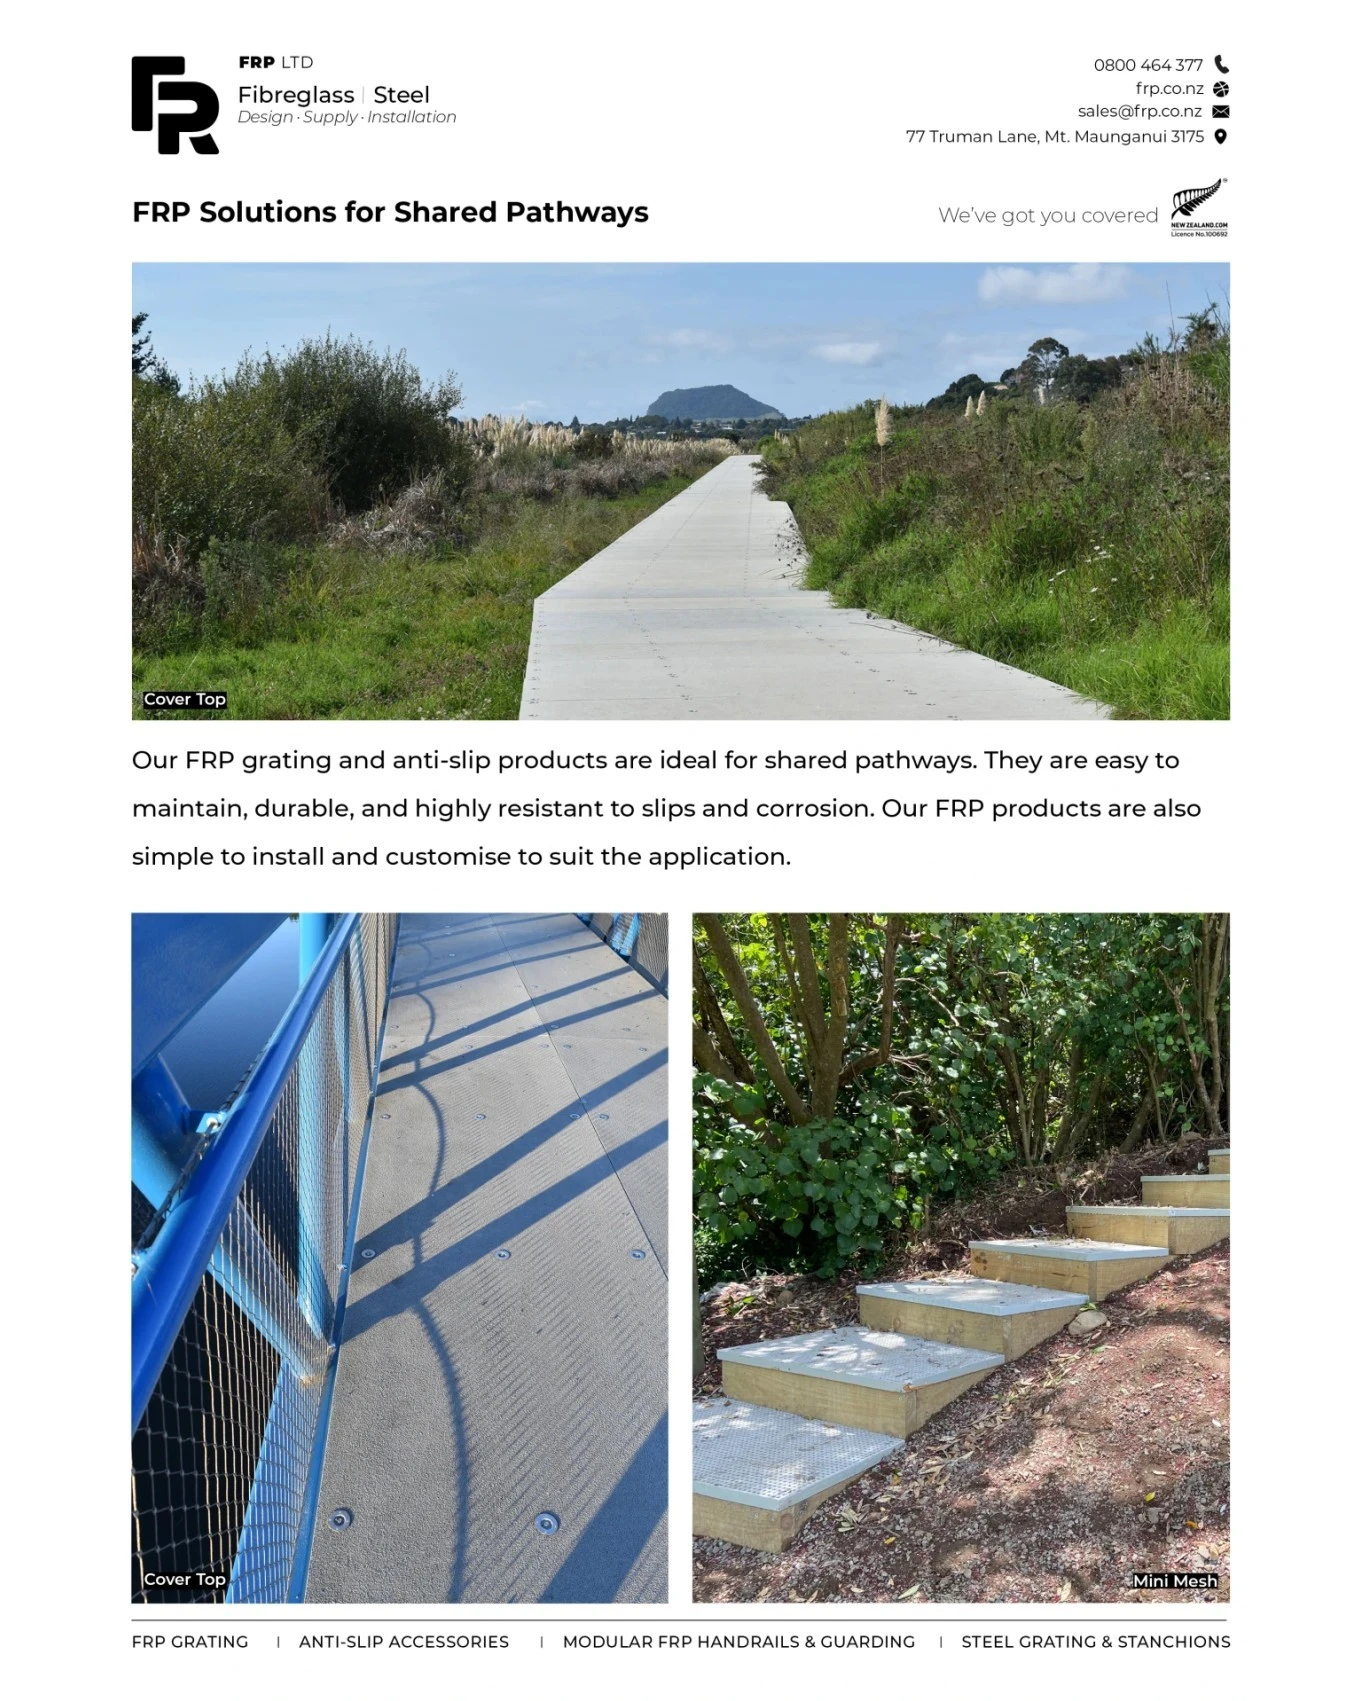 We are here to help!

#frp #frpproducts #antislip #nonslip #sharedpathways #walkways #boardwalks #cycleways #commercial #nzarchitects #nzcouncils #cityplanning